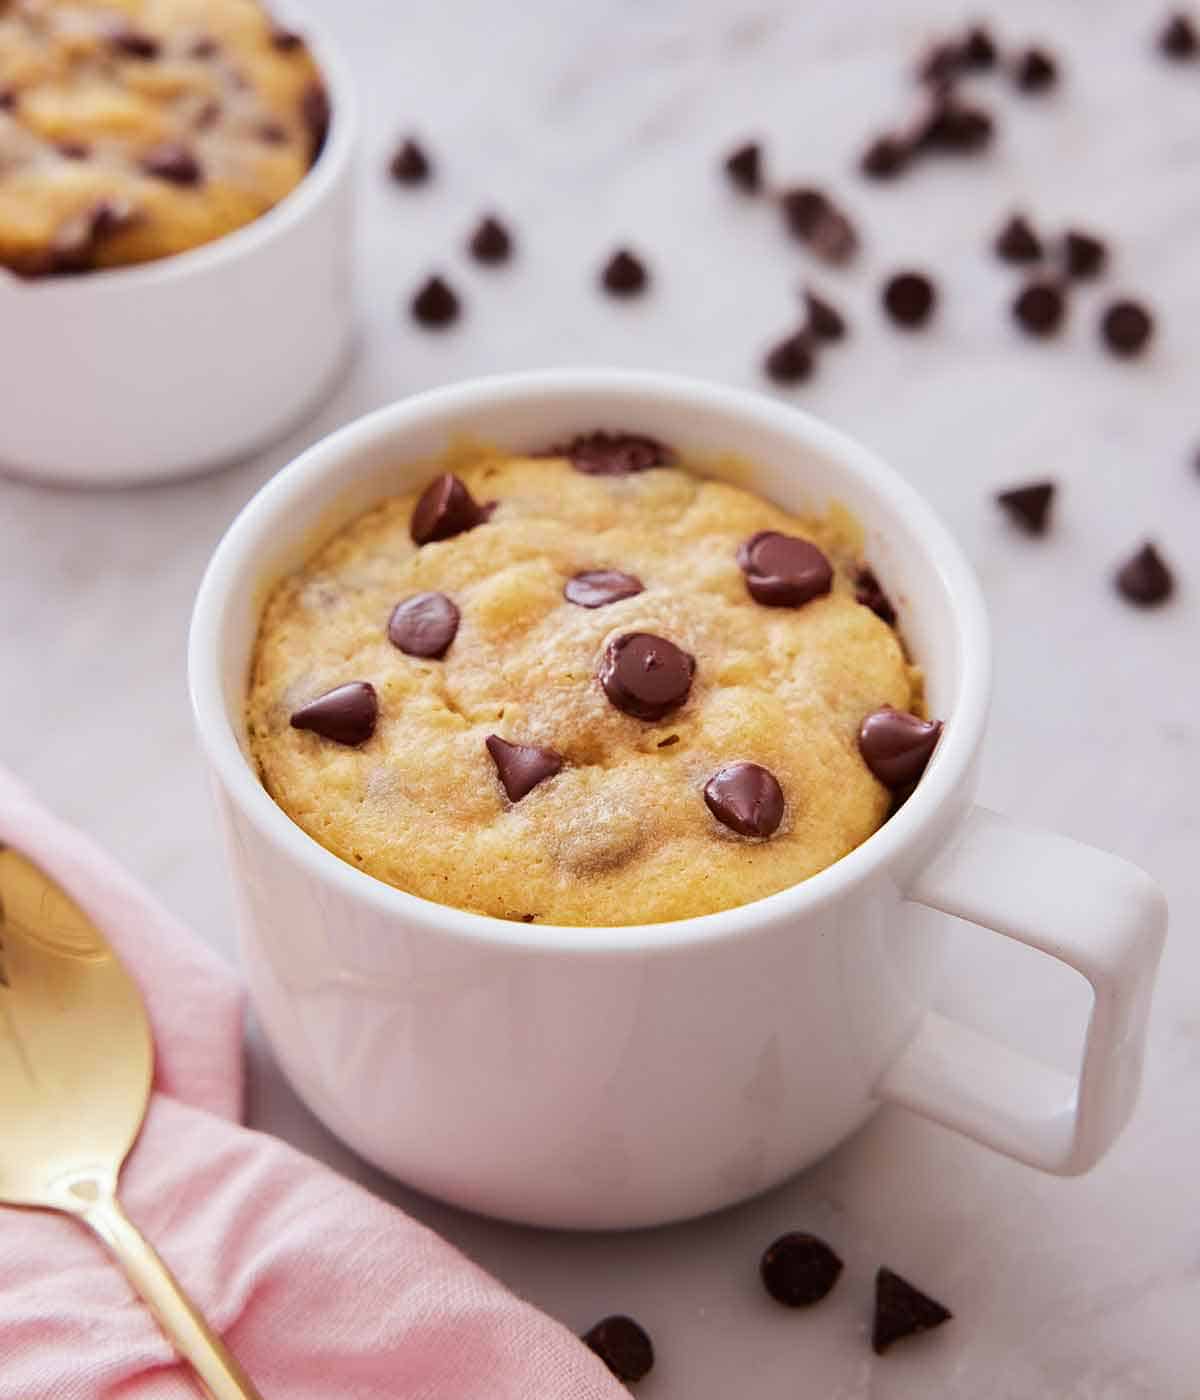 A cookie in a mug with chocolate chips scattered around with a spoon beside the mug.